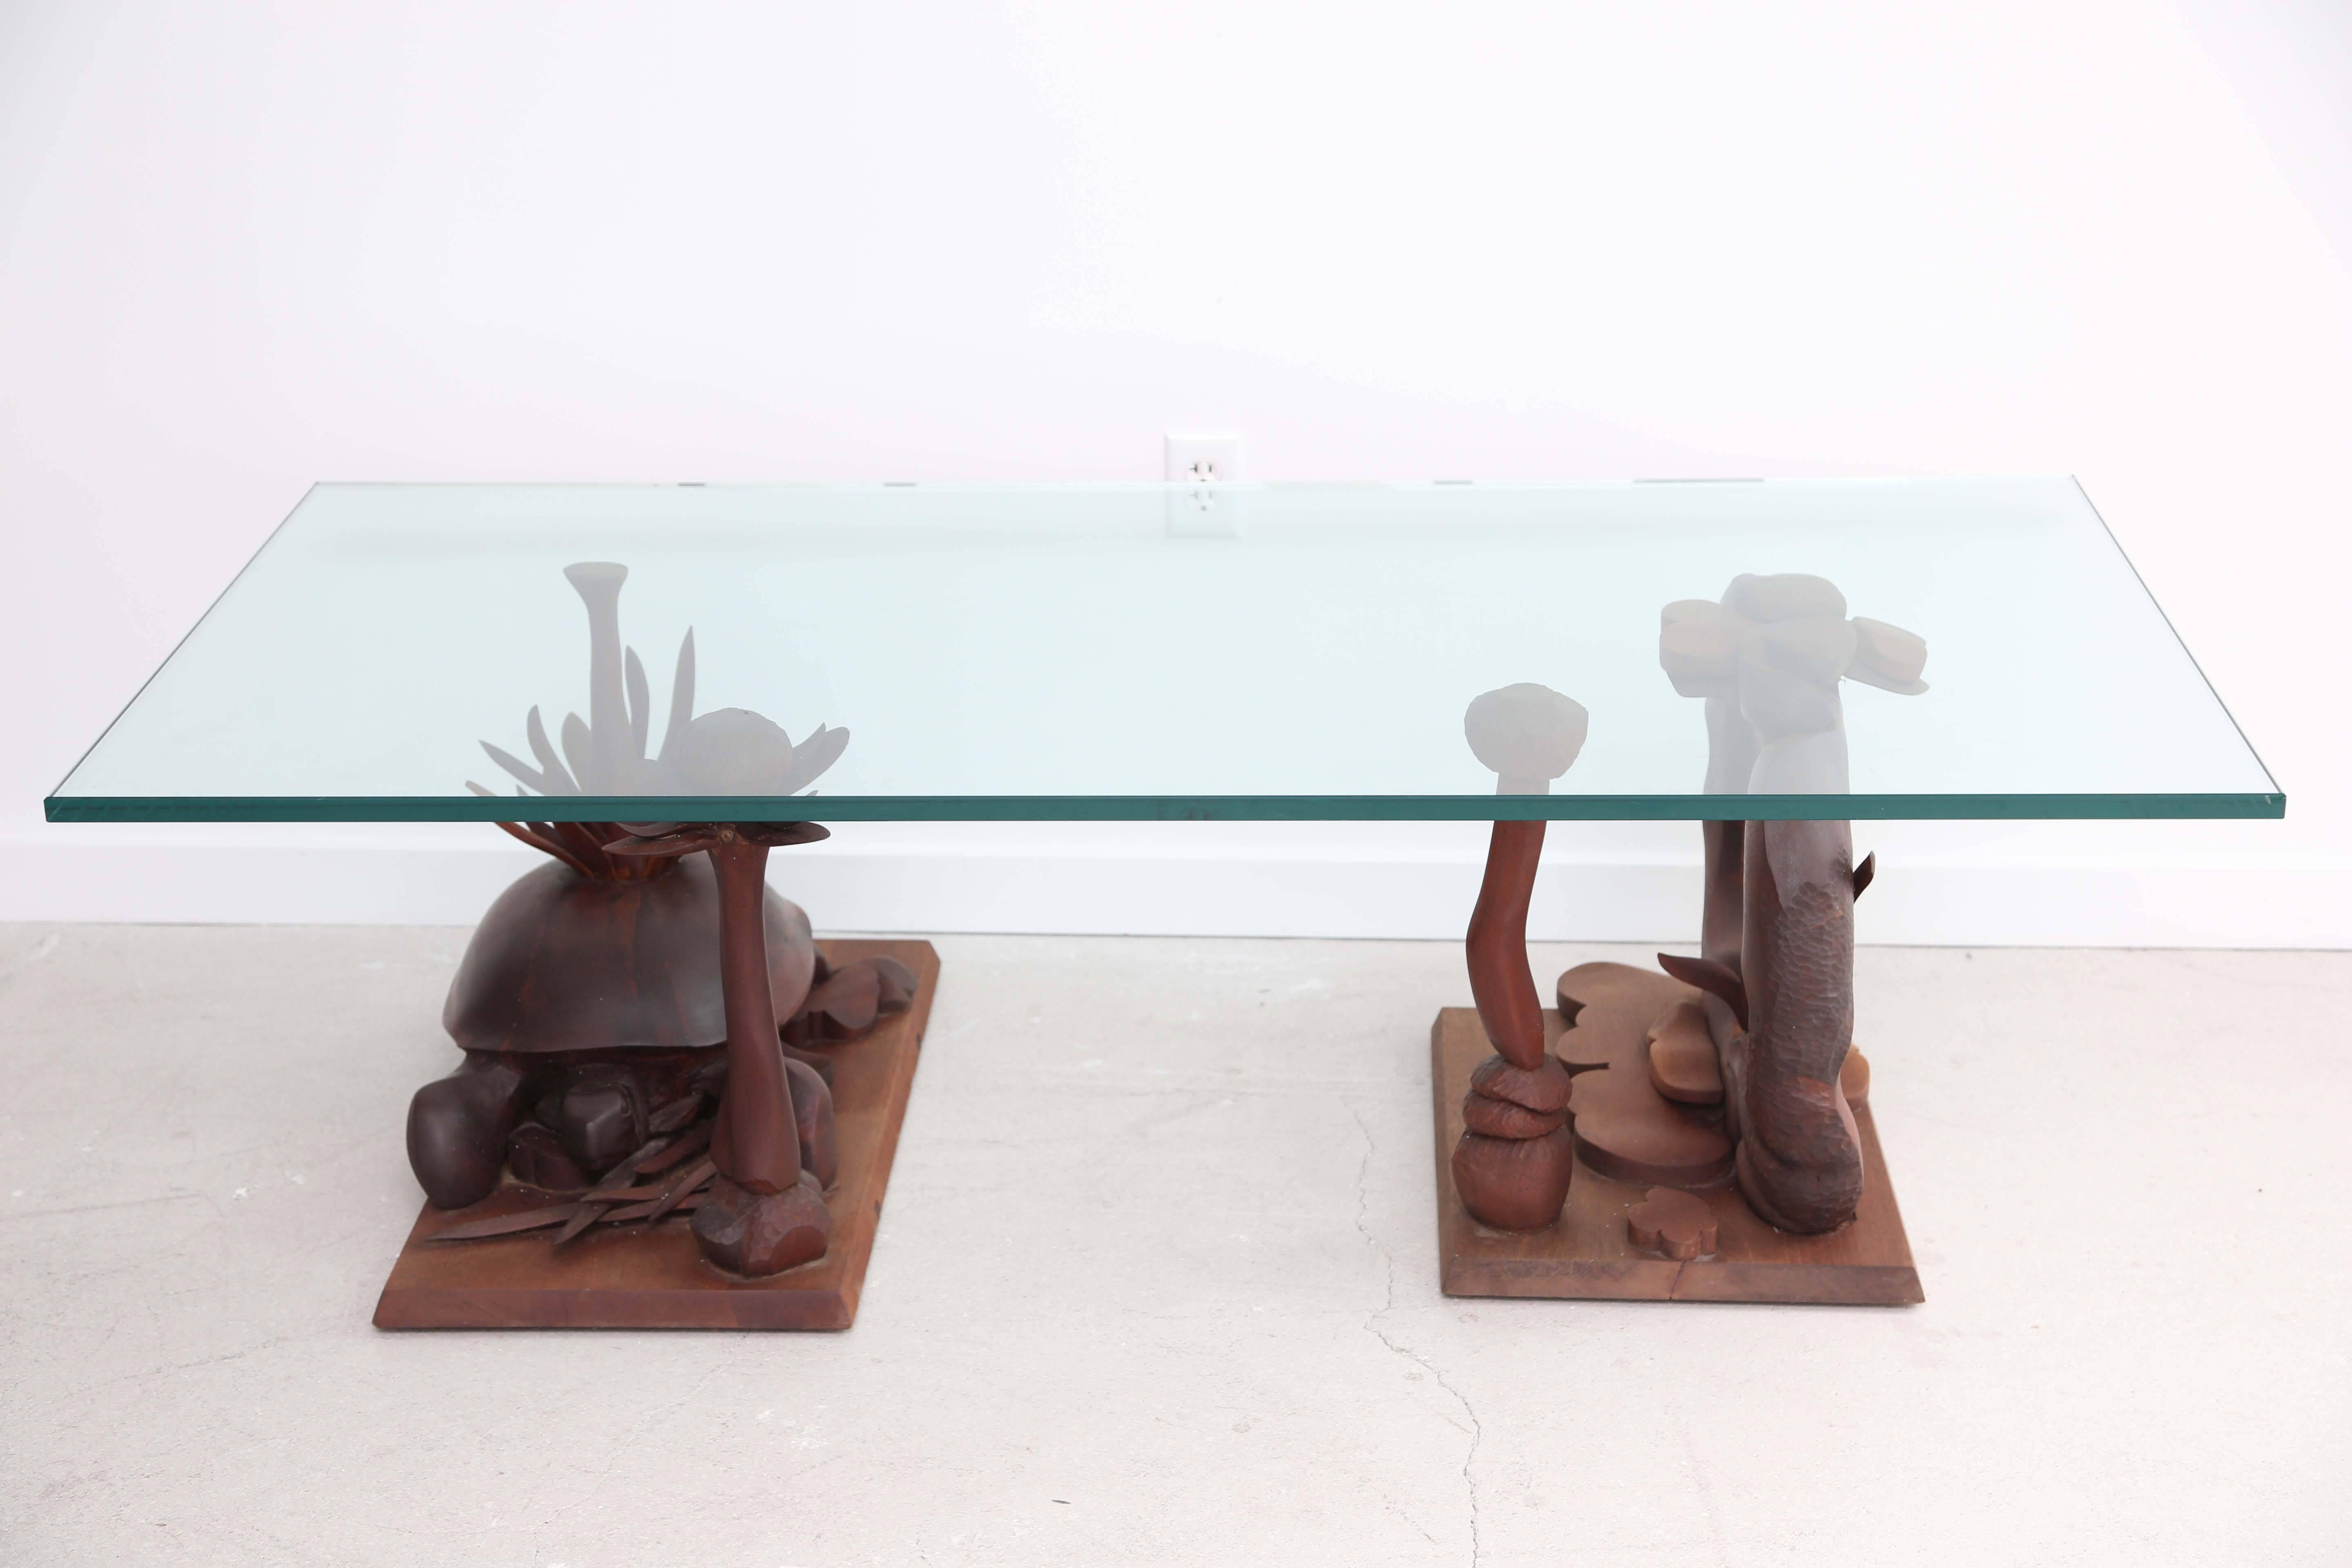 Organic and sculptural hand-carved table with sprouting tendrils, buds and a tortoise! The table is artist made and we have placed a rectangular glass top on it- but the bases may be arranged in various ways and may be two side tables rather than